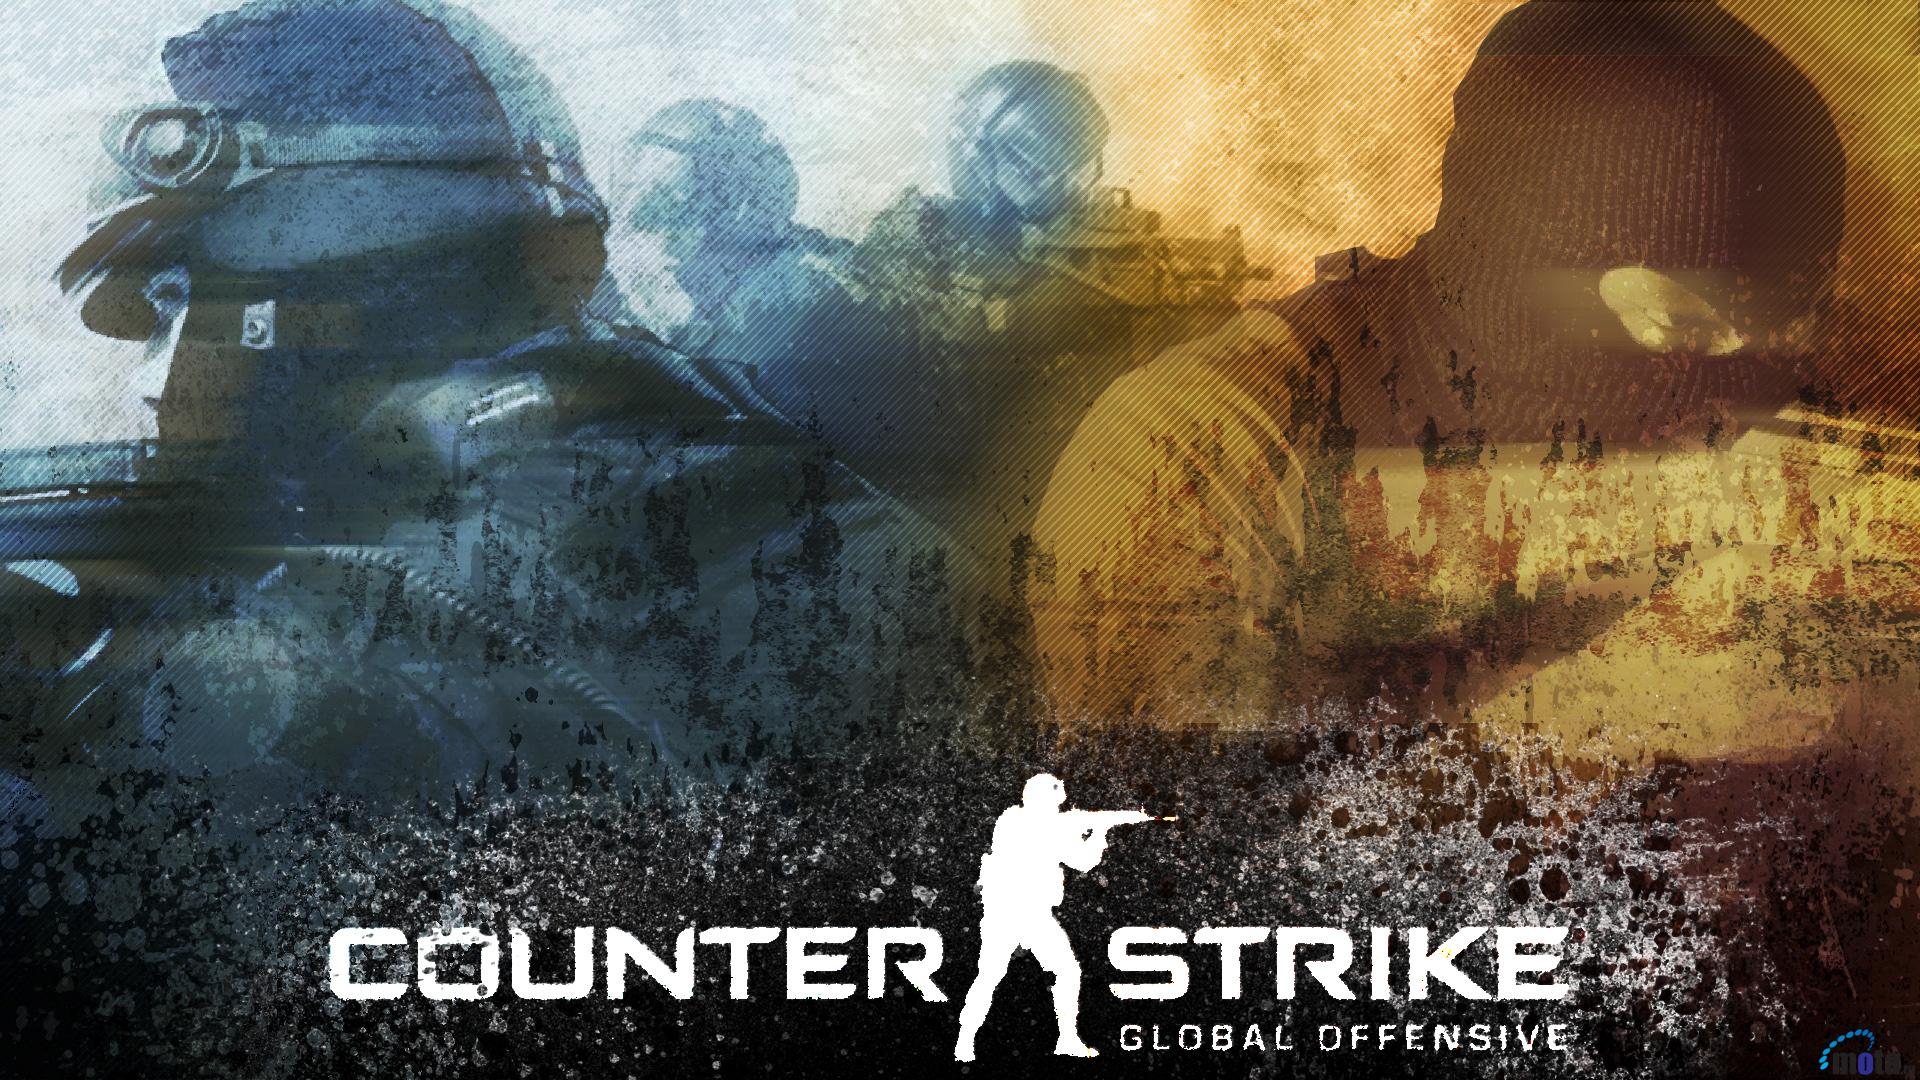 Download Wallpaper Counter-Strike: Global Offensive (1920 x 1080 ...